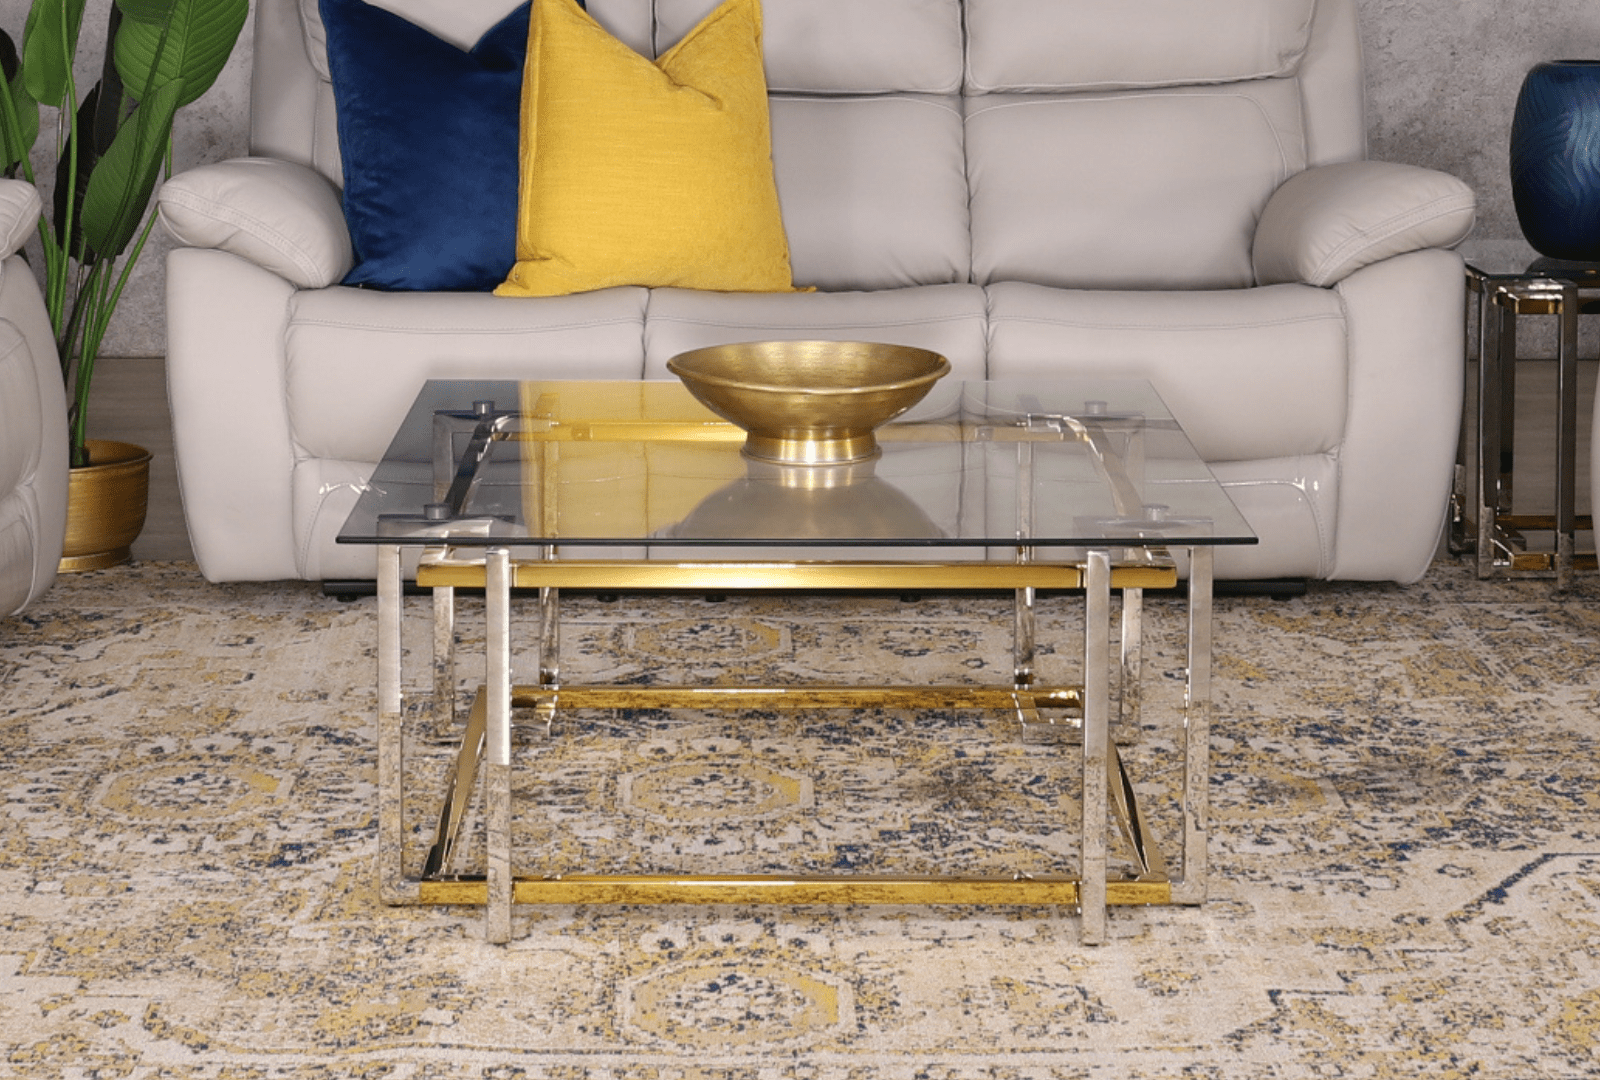 Things you should know when incorporating Gold & Silver into your home interiors